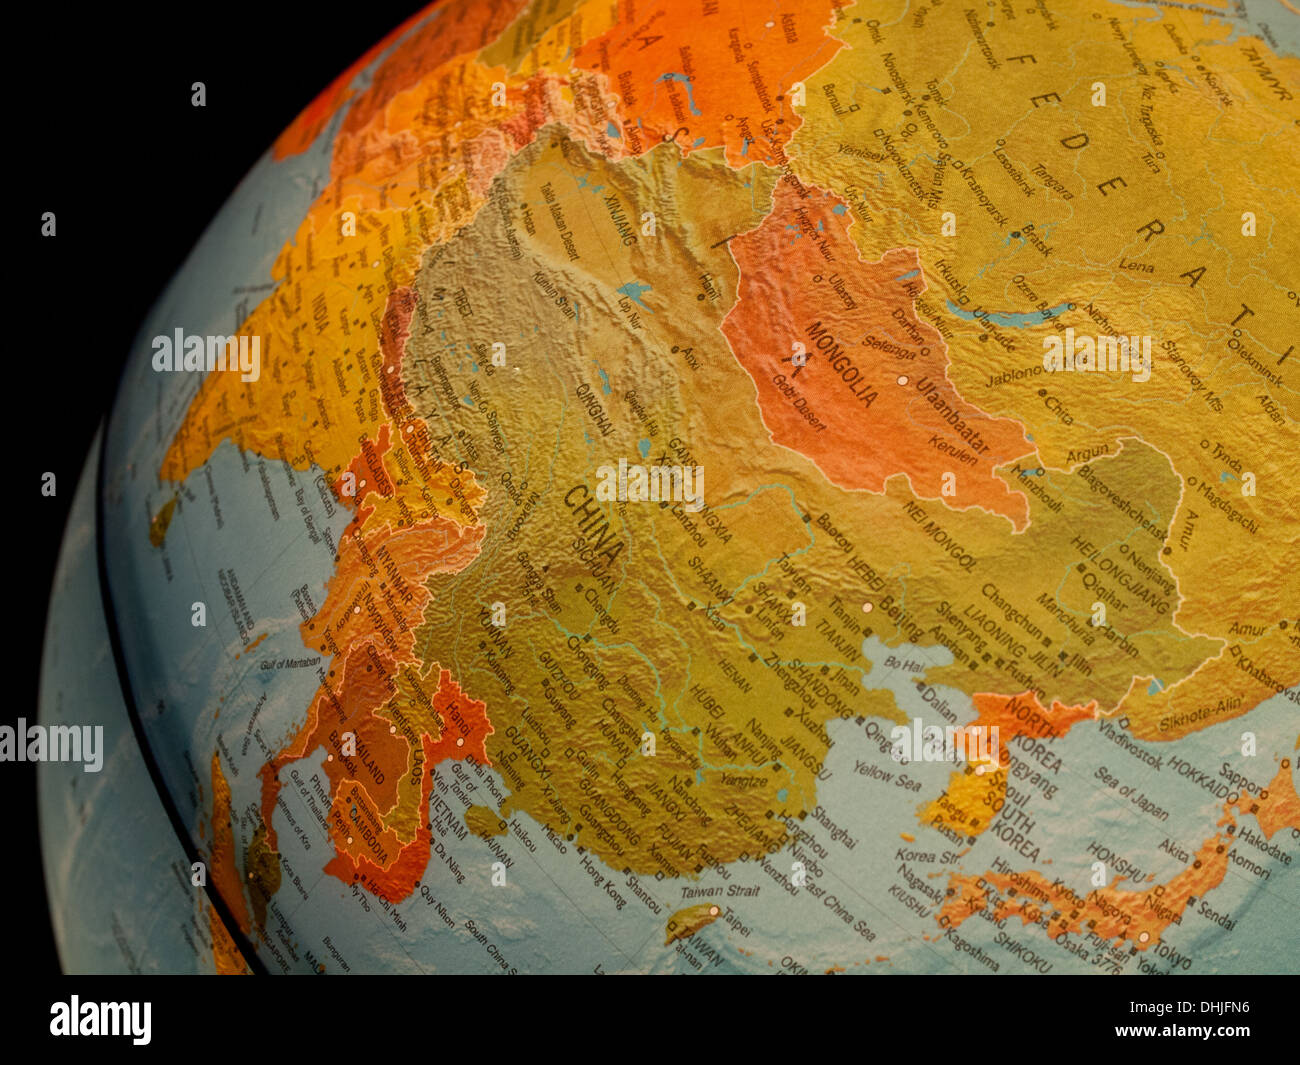 A view of China and the Far East on a beautiful, illuminated globe. Stock Photo